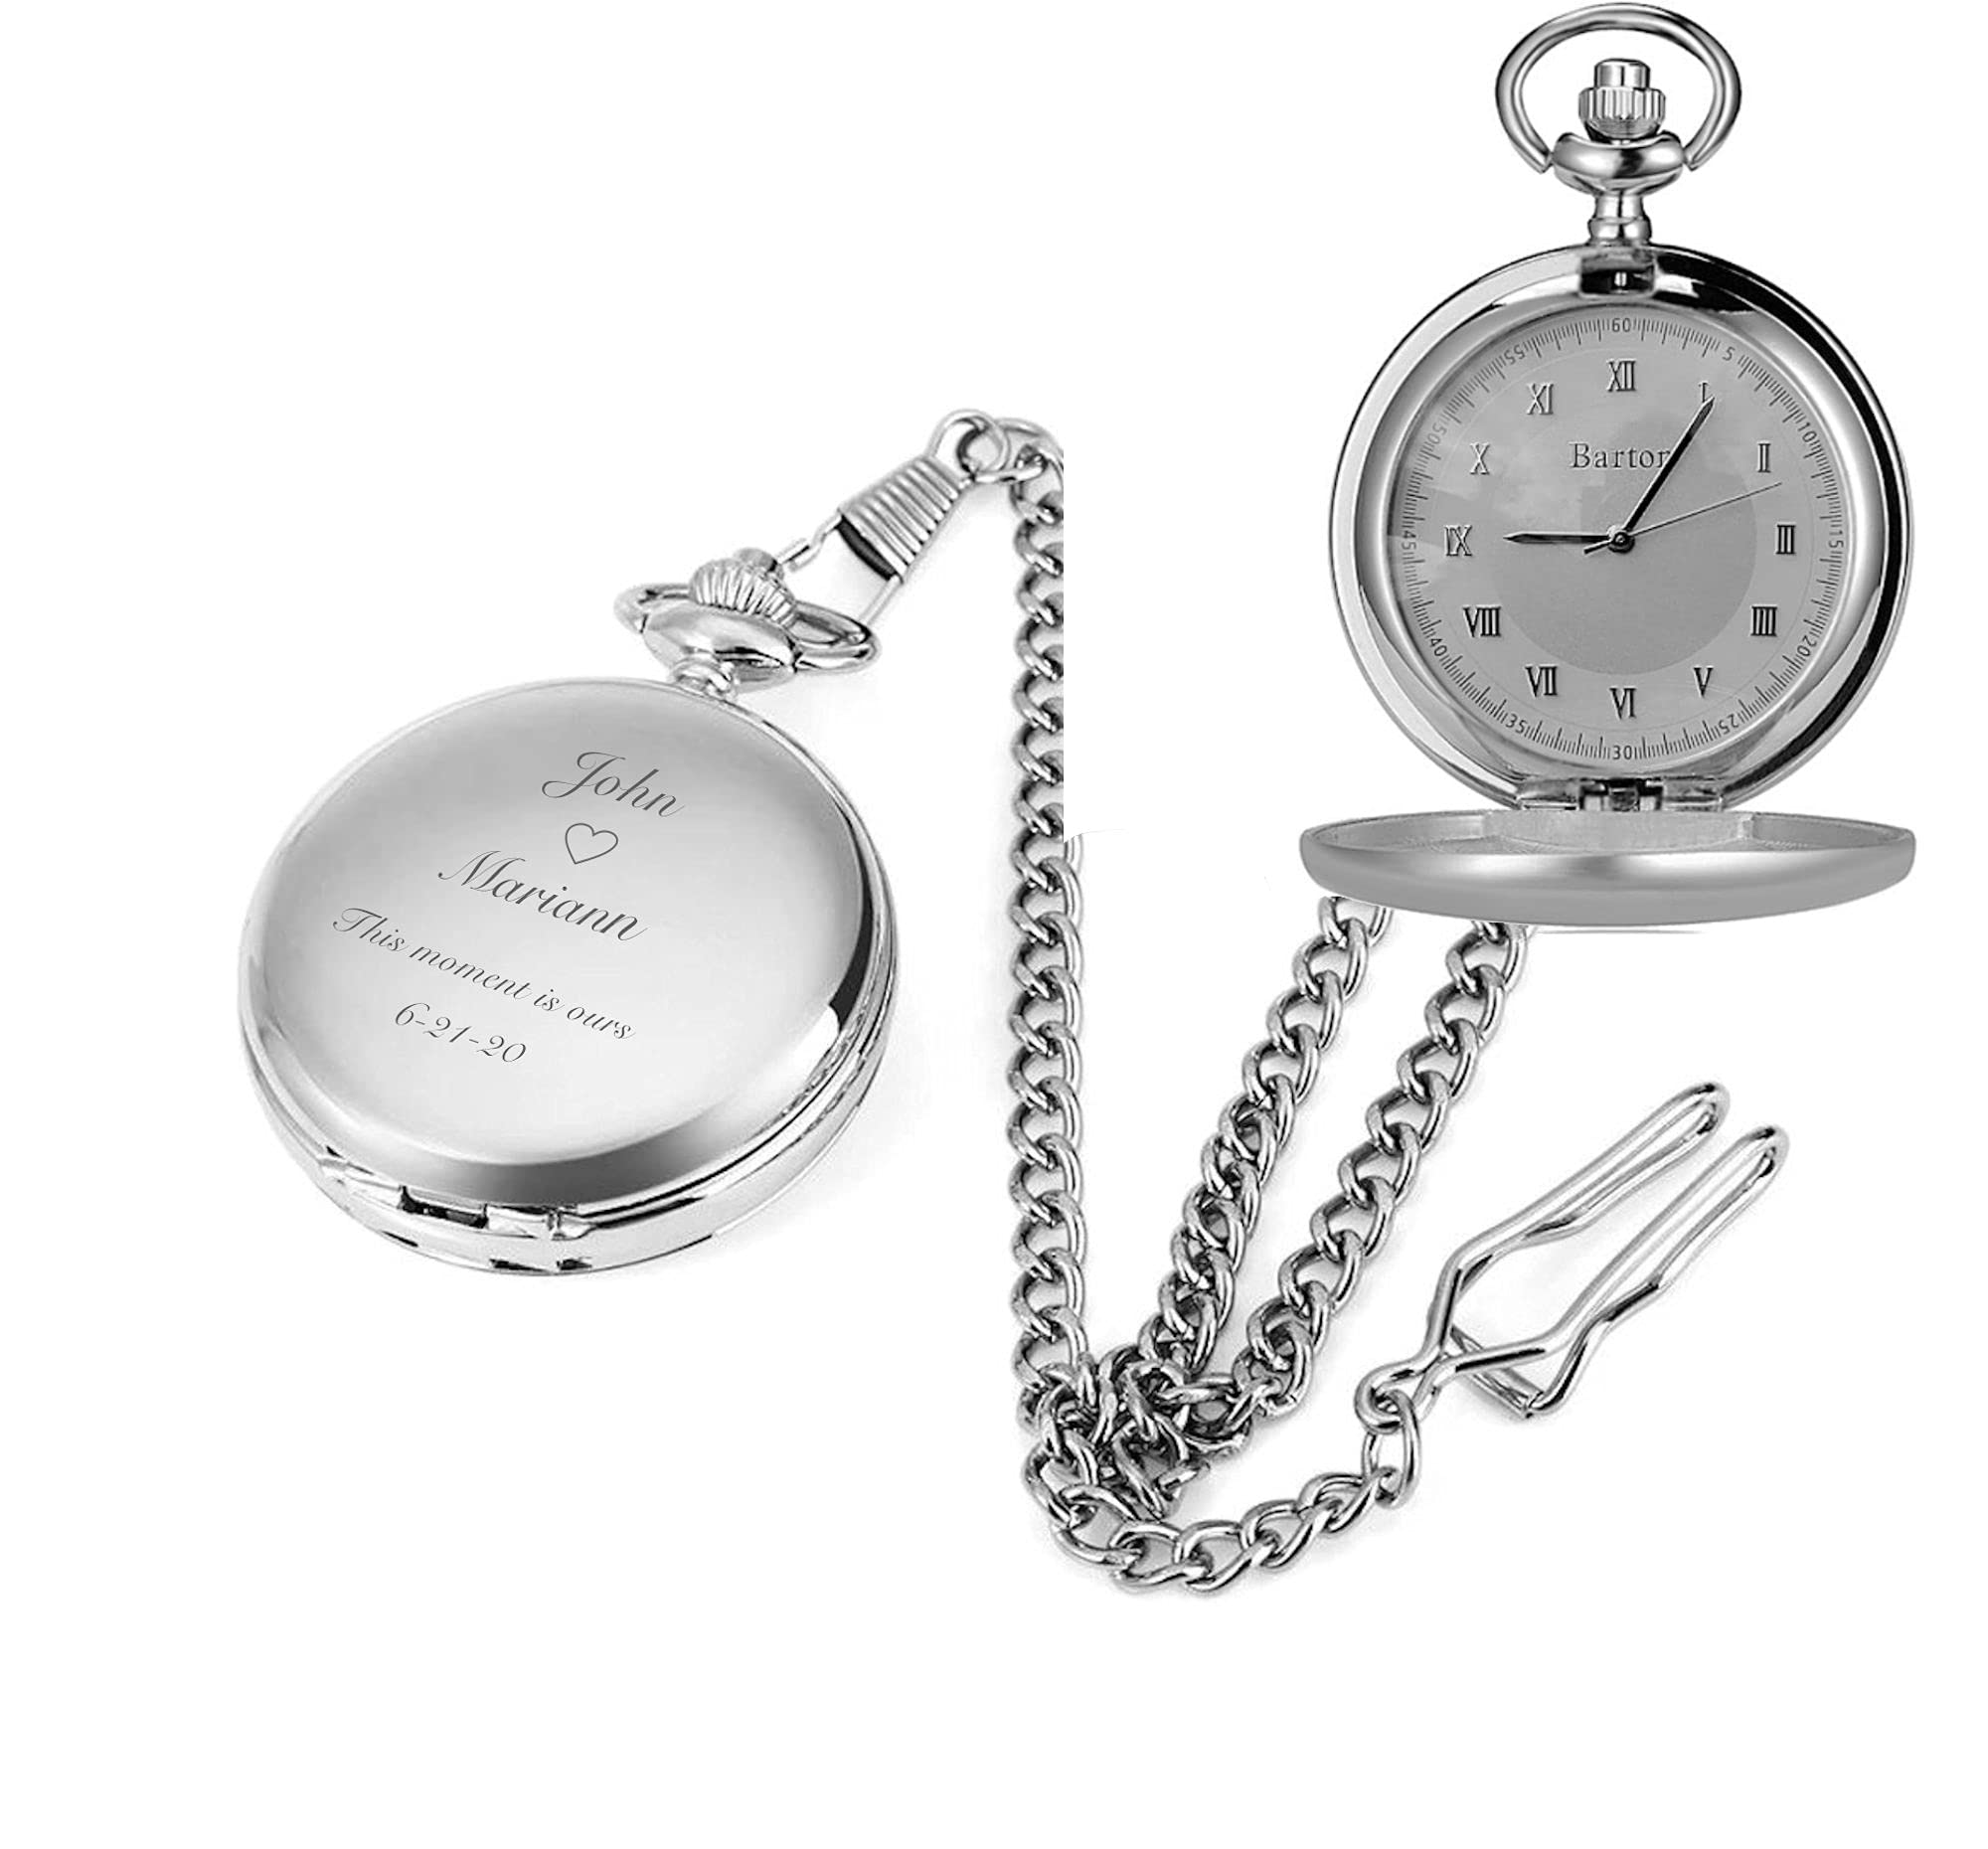 A&L Engraving Personalized Men's Stainless Steel Pocket Watch with Glass Cover and Chain Custom Engraved Free - Ships from USA,silver(PW-10)